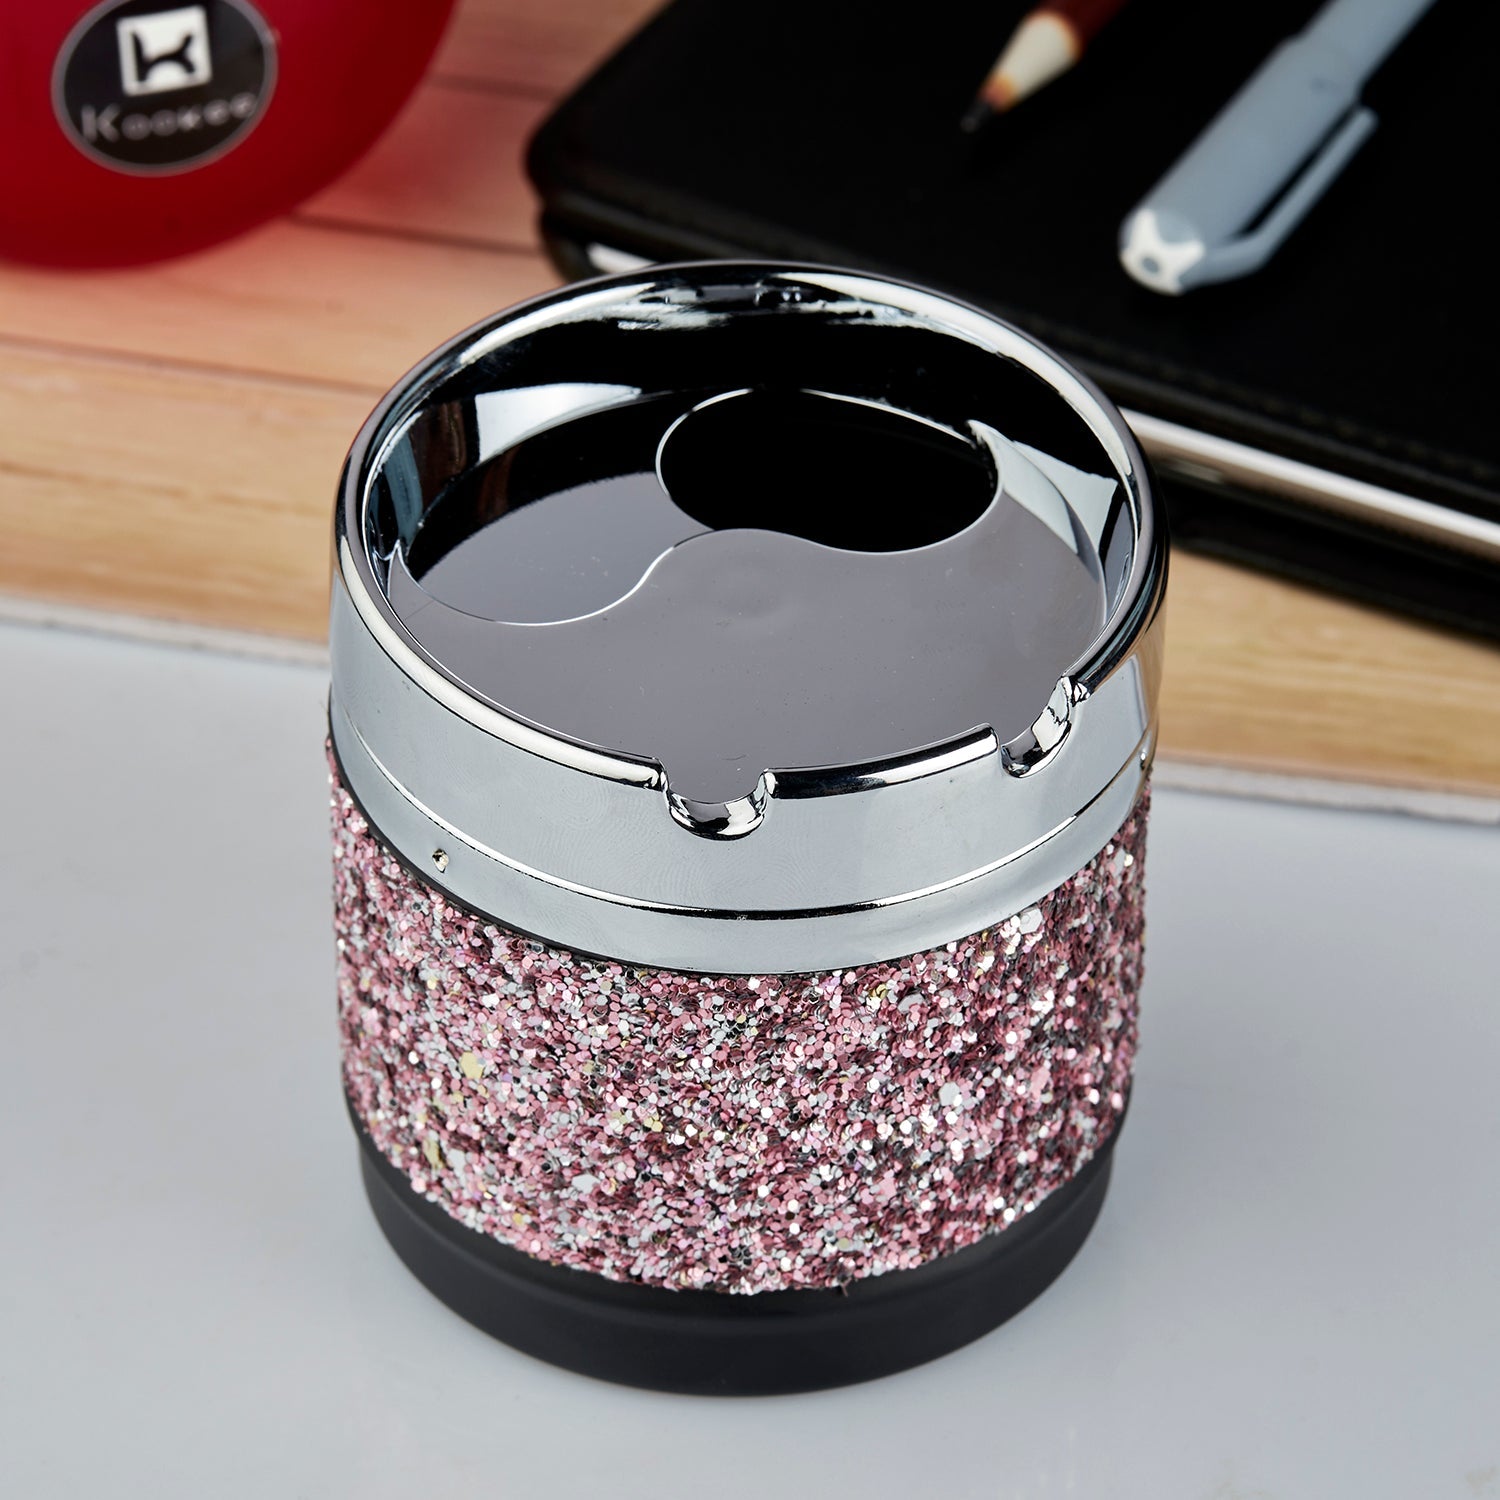 Smokeless Plastic Tin Windproof Ashtray Rotating Lid Convenient Smokeless Ashtray For Cigarette, Cigar for Home Decor Tabletop Ash Tray for Smokers, Round, Pink / Silver Glitter